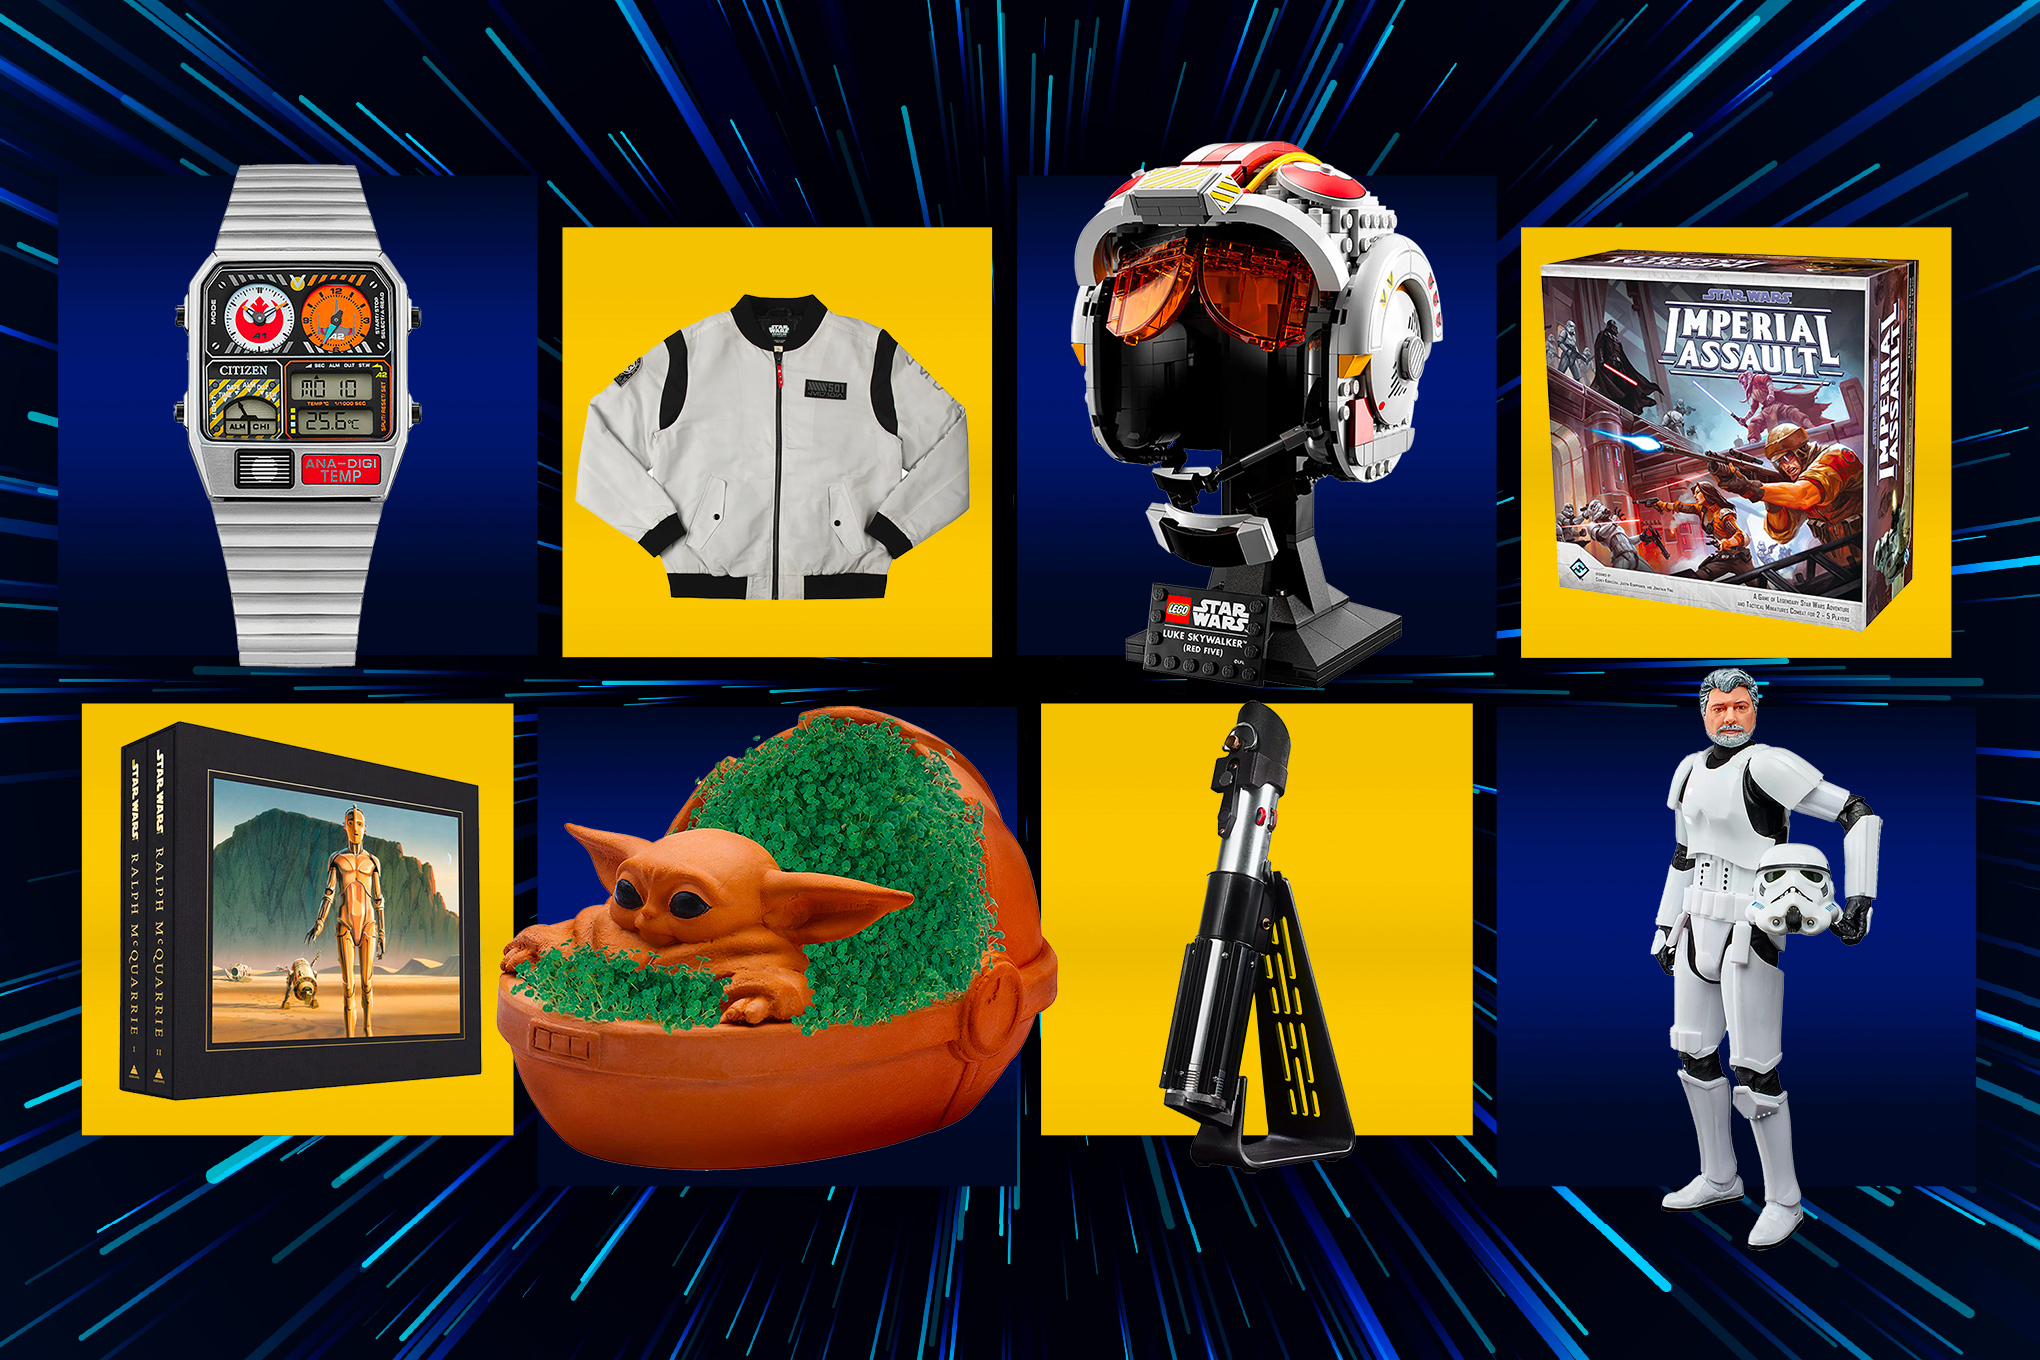 A mosaic consisting of eight items in this guide, including a Citizen watch, a Star Wars bomber jacket from Heroes &amp; Villians, a Ralph McQuarrie Star Wars art book, Star Wars Imperial Assault board games, the Lego Red Five helmet, a Darth Vader lightsaber replica, a Grogu Chia Pet, and a Kenner Stormtrooper figure of George Lucas.